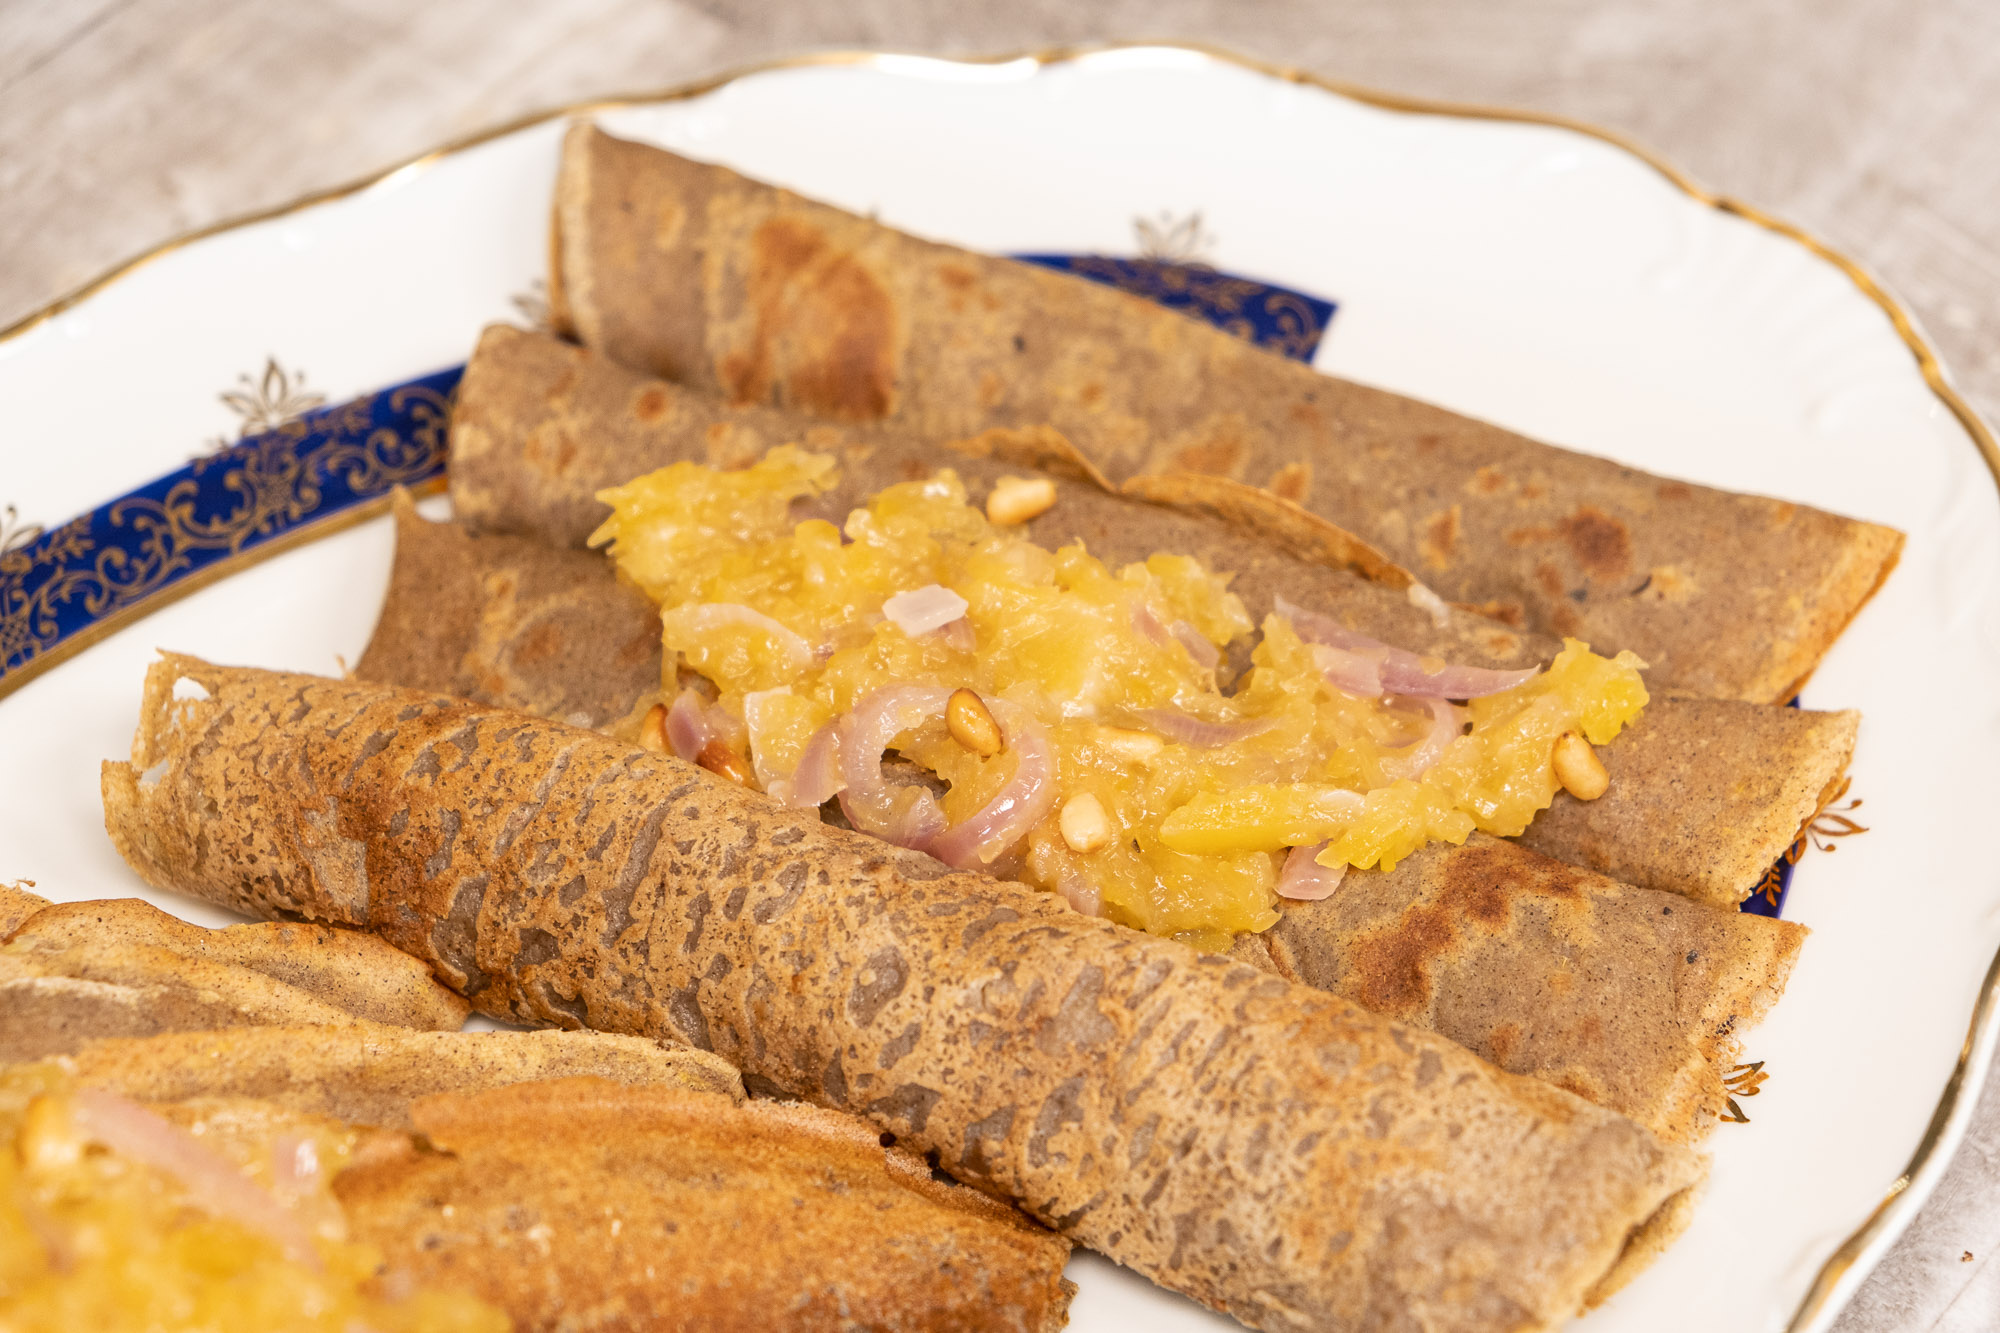 Crêpes party 🎉 - Recette i-Cook'in